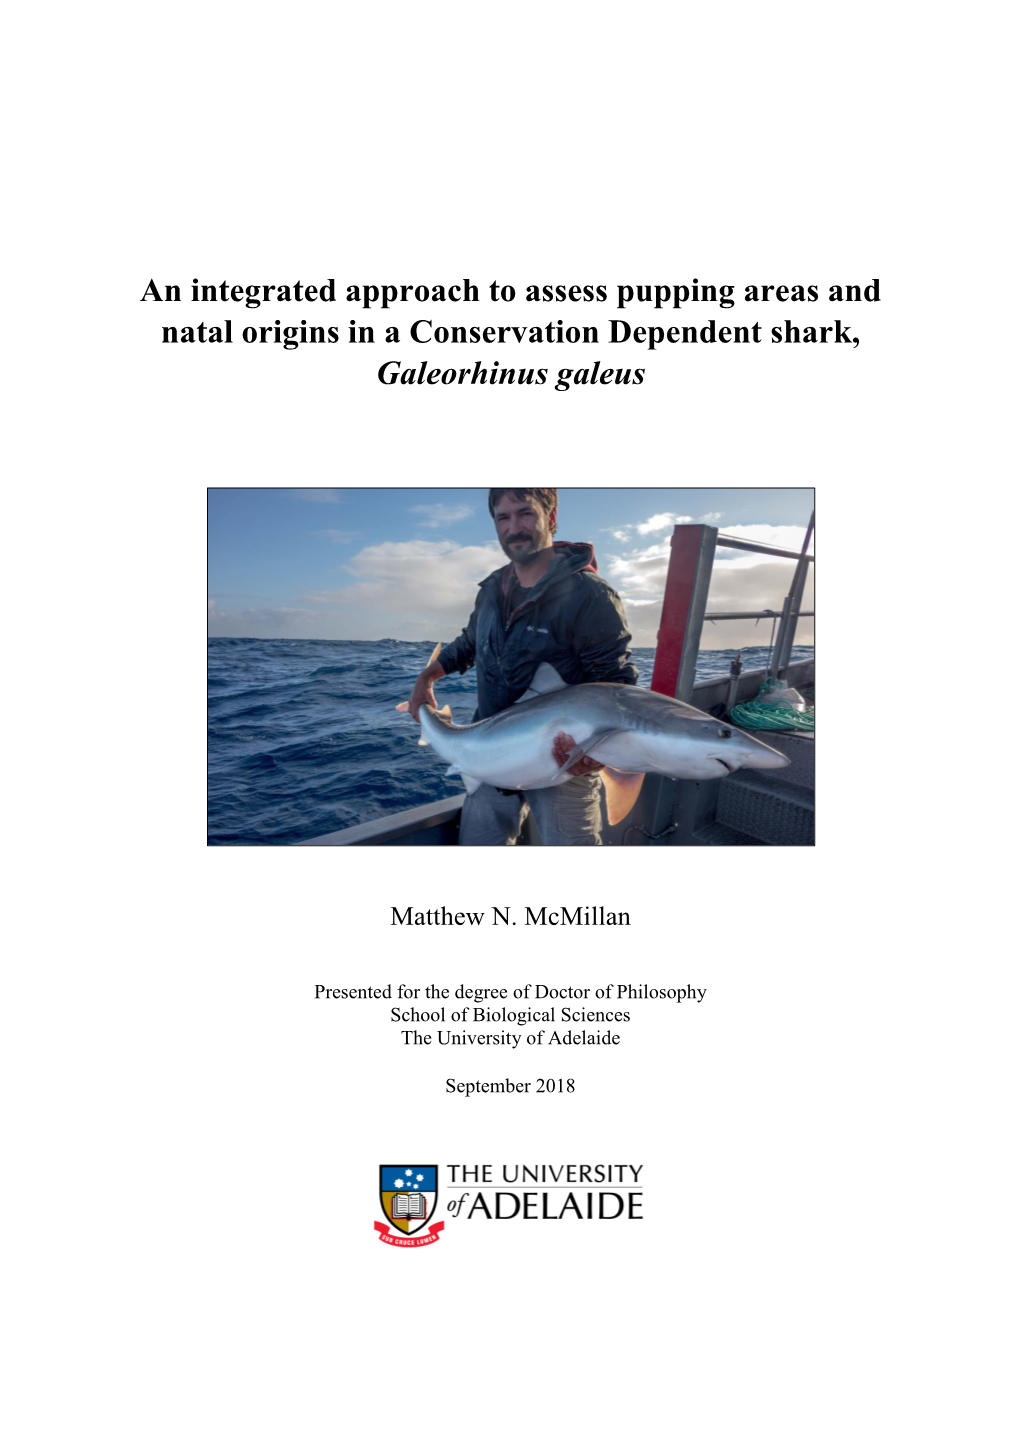 An Integrated Approach to Assess Pupping Areas and Natal Origins in a Conservation Dependent Shark, Galeorhinus Galeus